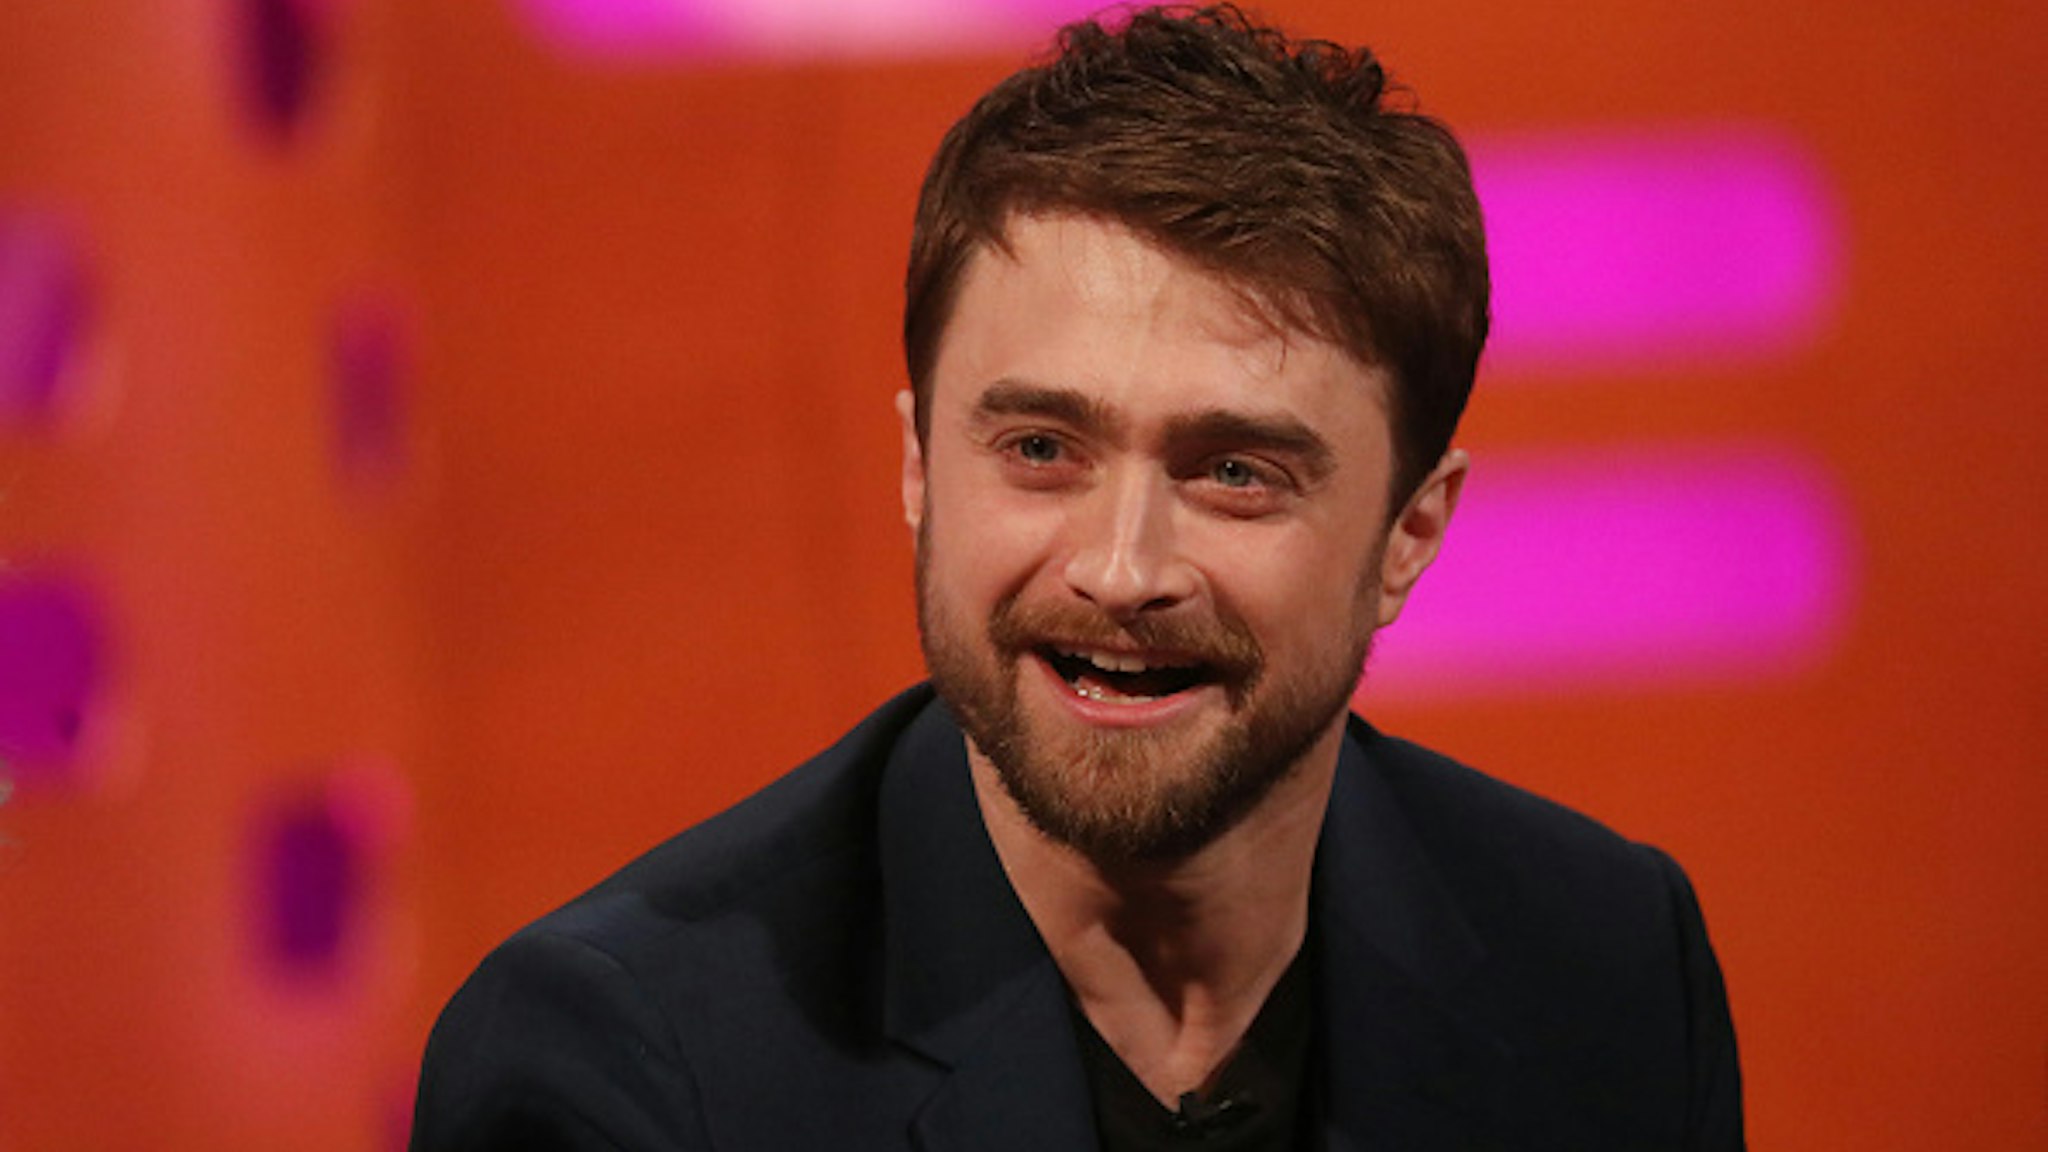 Daniel Radcliffe during the filming for the Graham Norton Show at BBC Studioworks 6 Television Centre, Wood Lane, London, to be aired on BBC One on Friday evening.